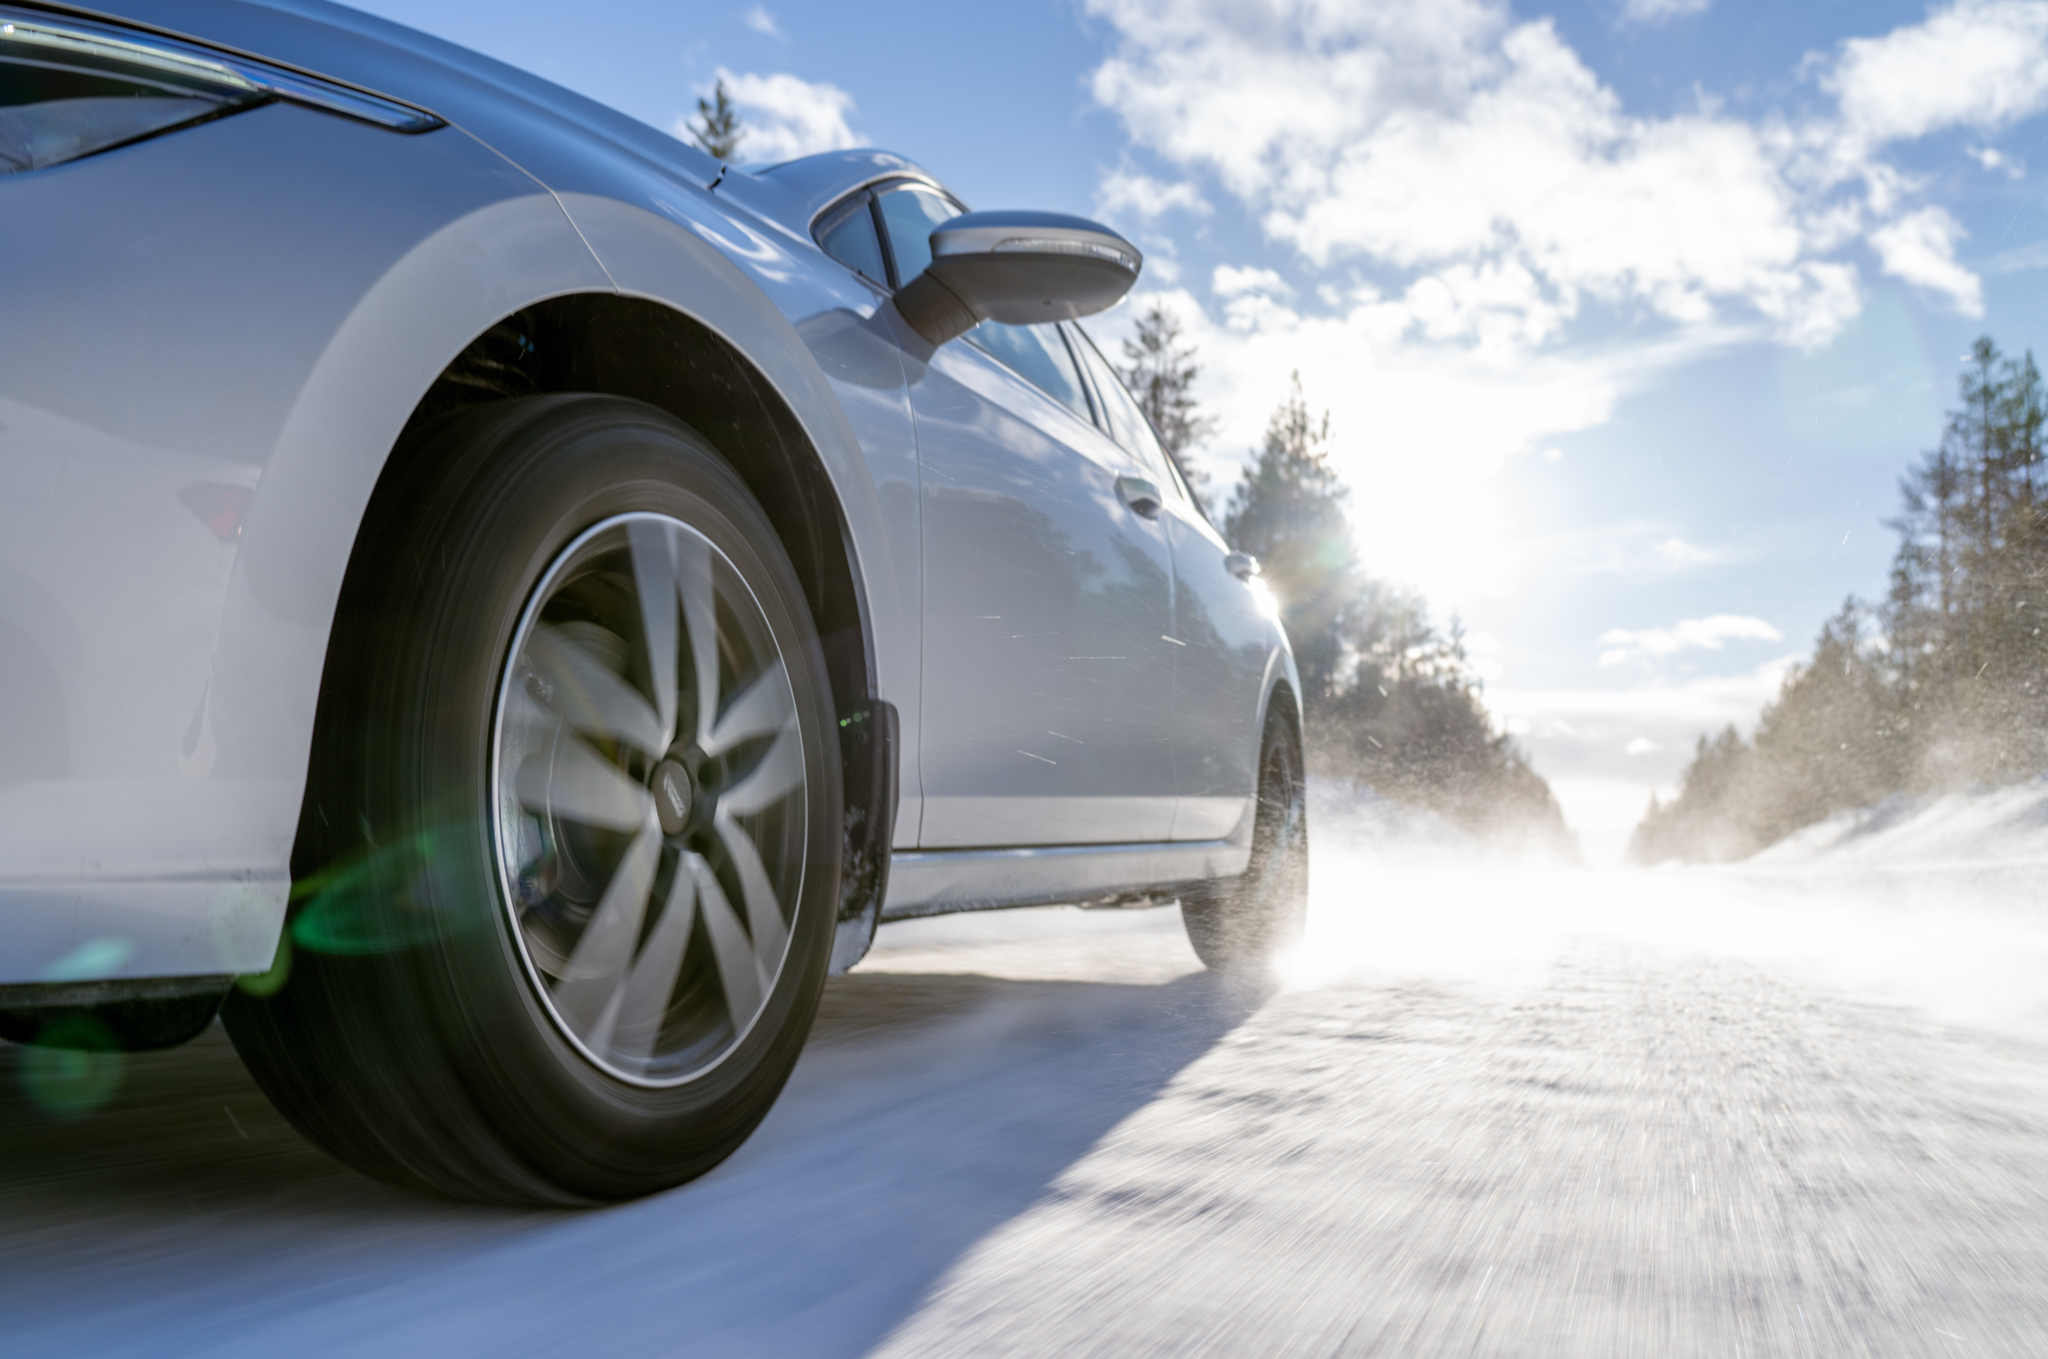 Nokian Tyres recognised for ‘leadership’ in climate change mitigation